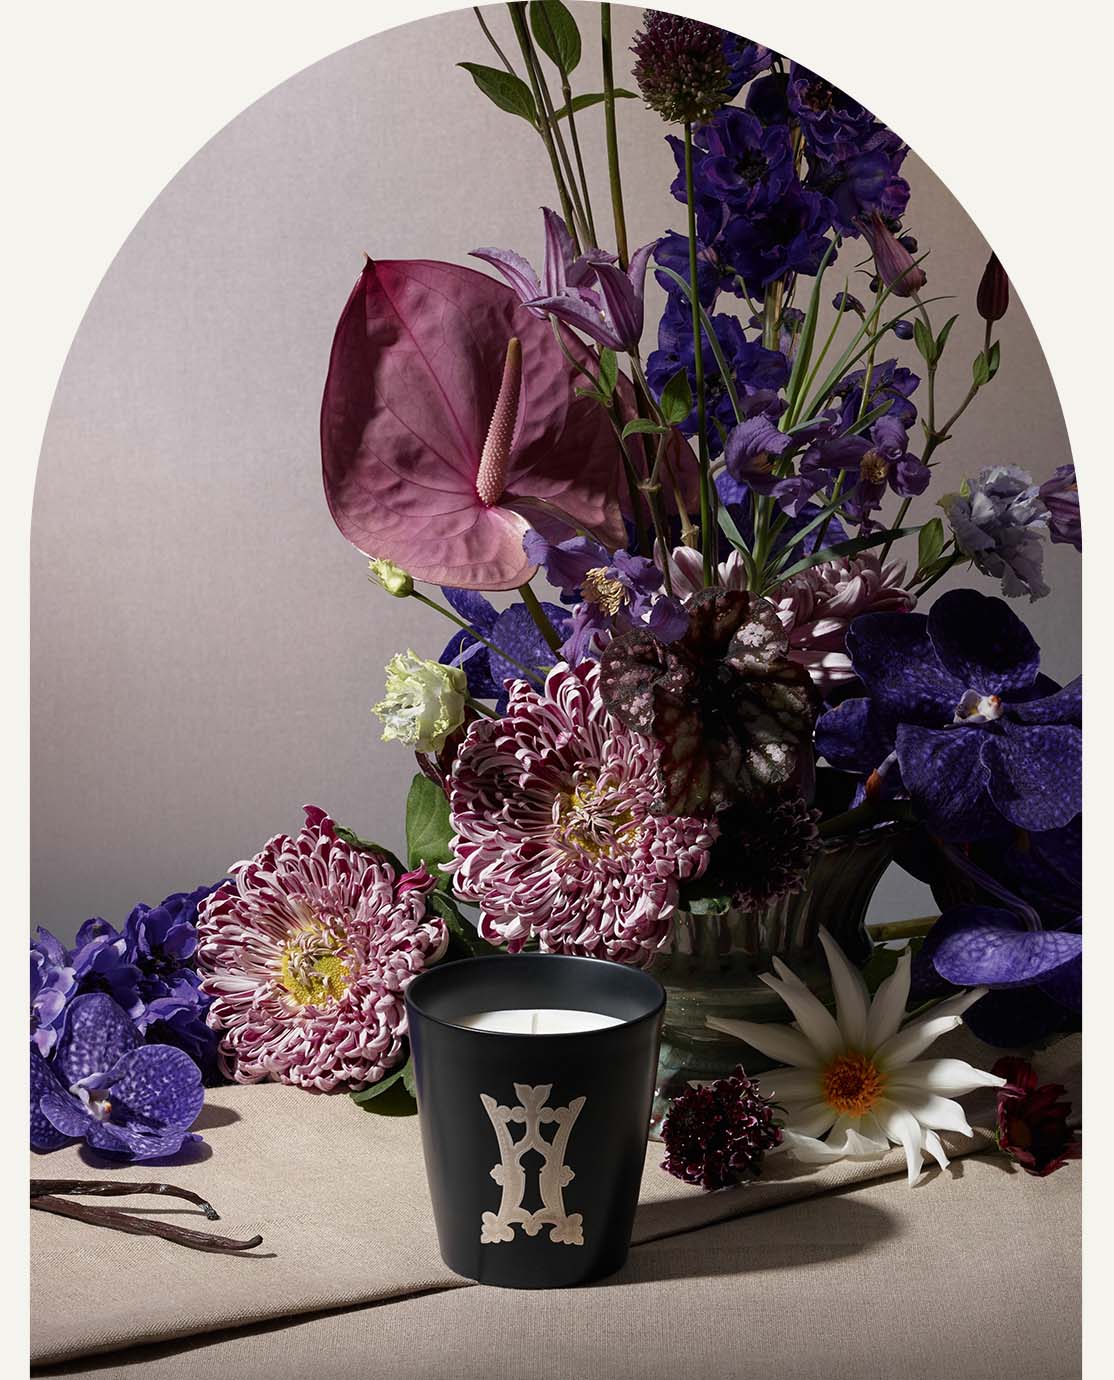 A black candle in front of a bouquet of purple flowers